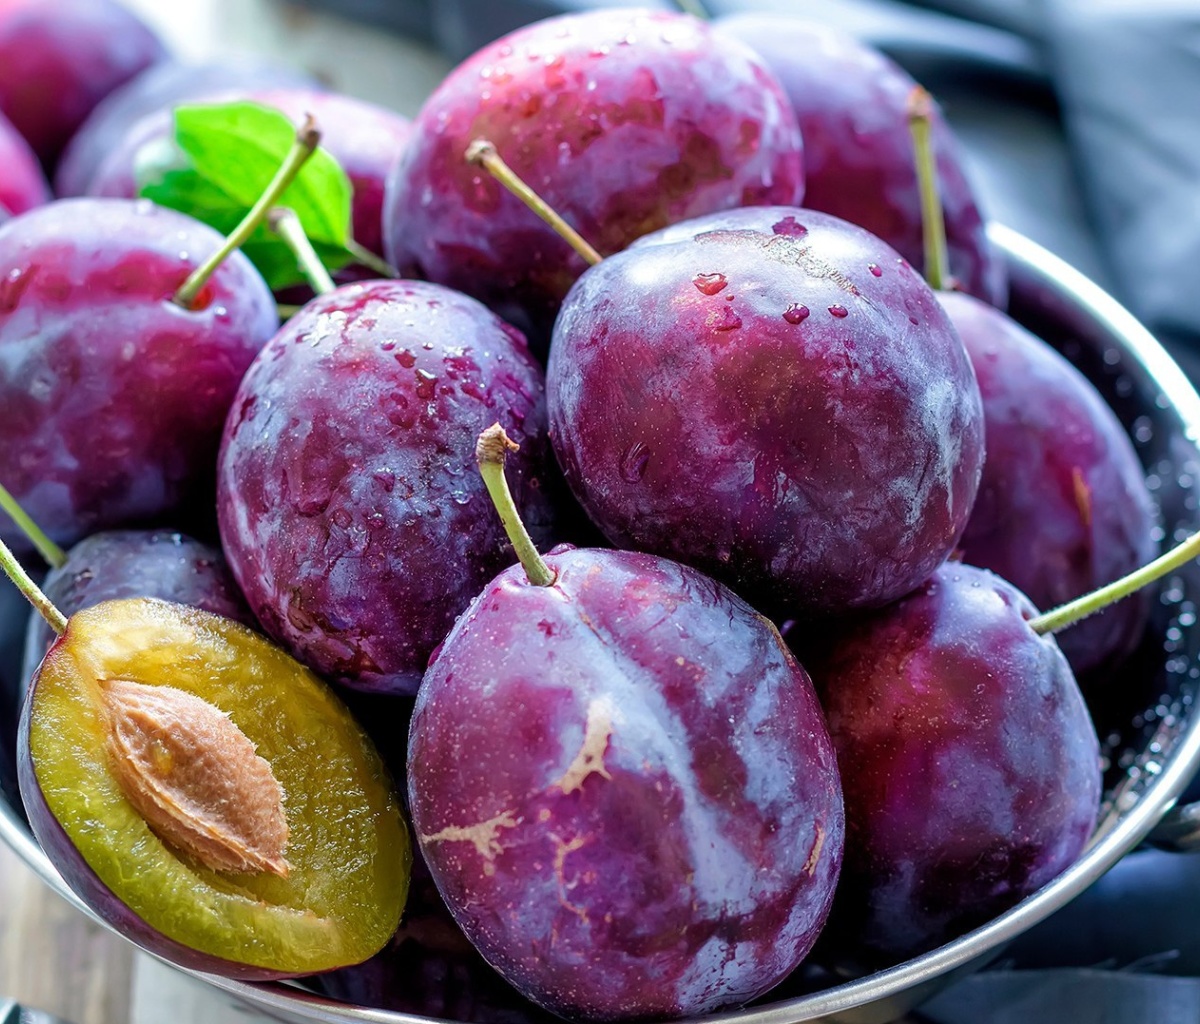 Plums with Vitamins wallpaper 1200x1024